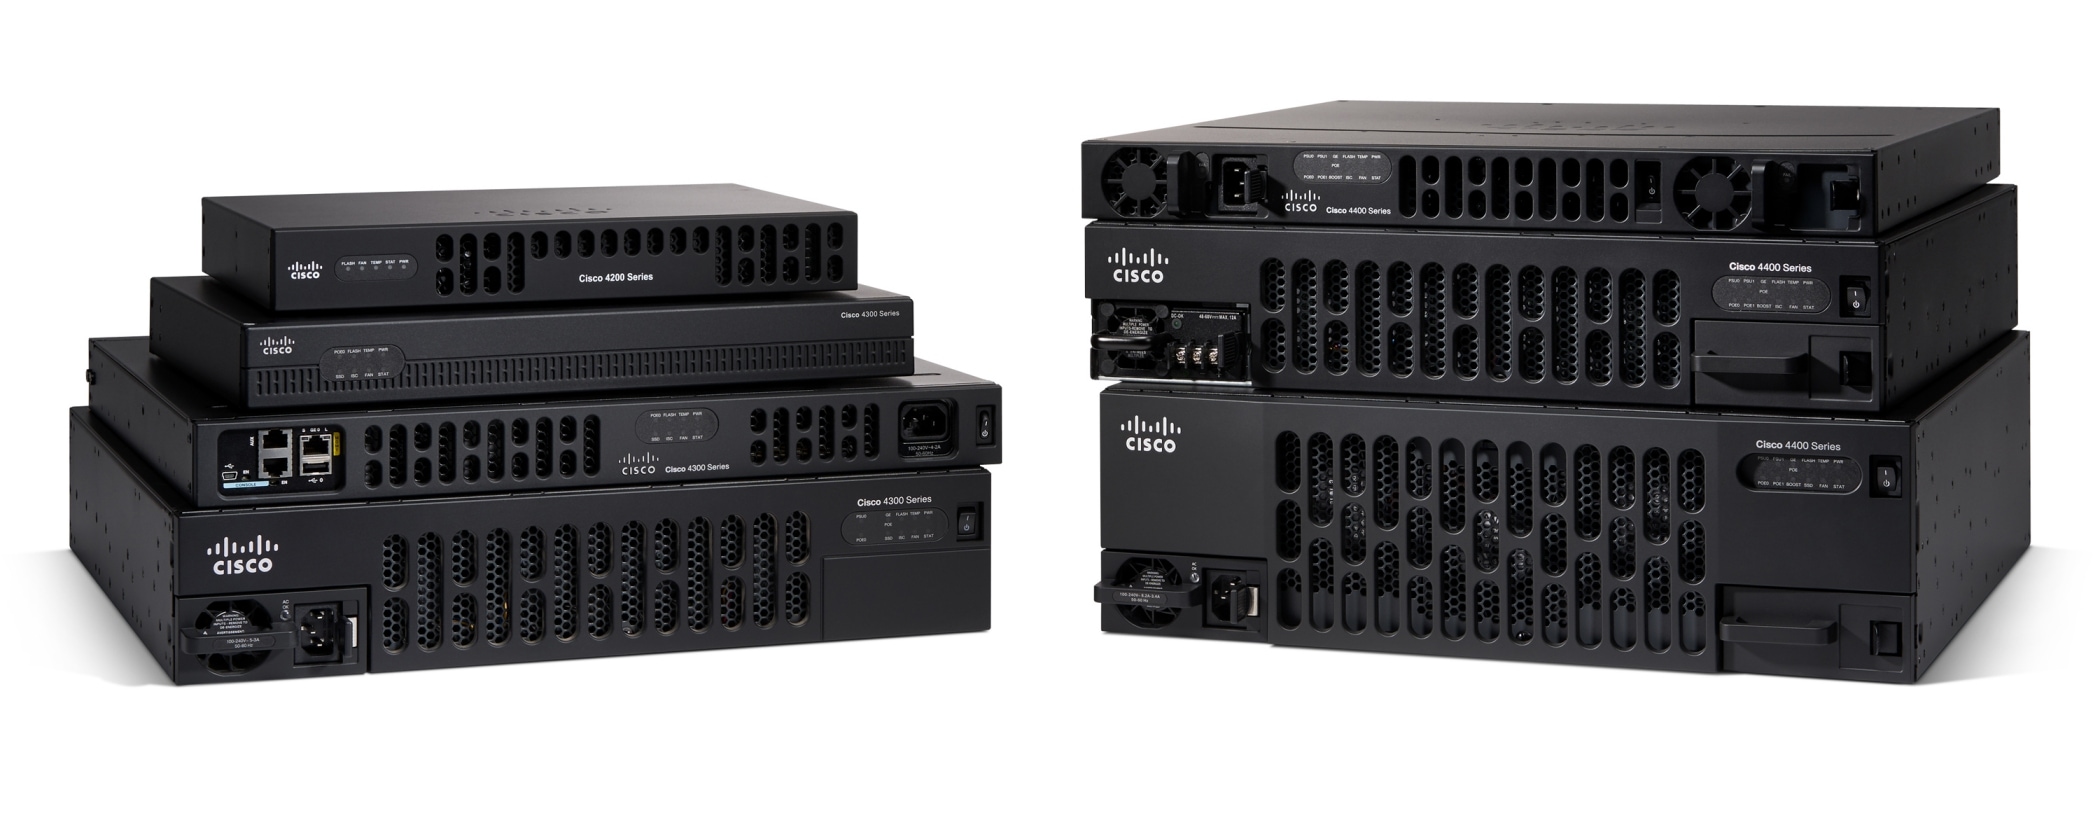 Family image of Cisco 4000 Series Integrated Services Routers